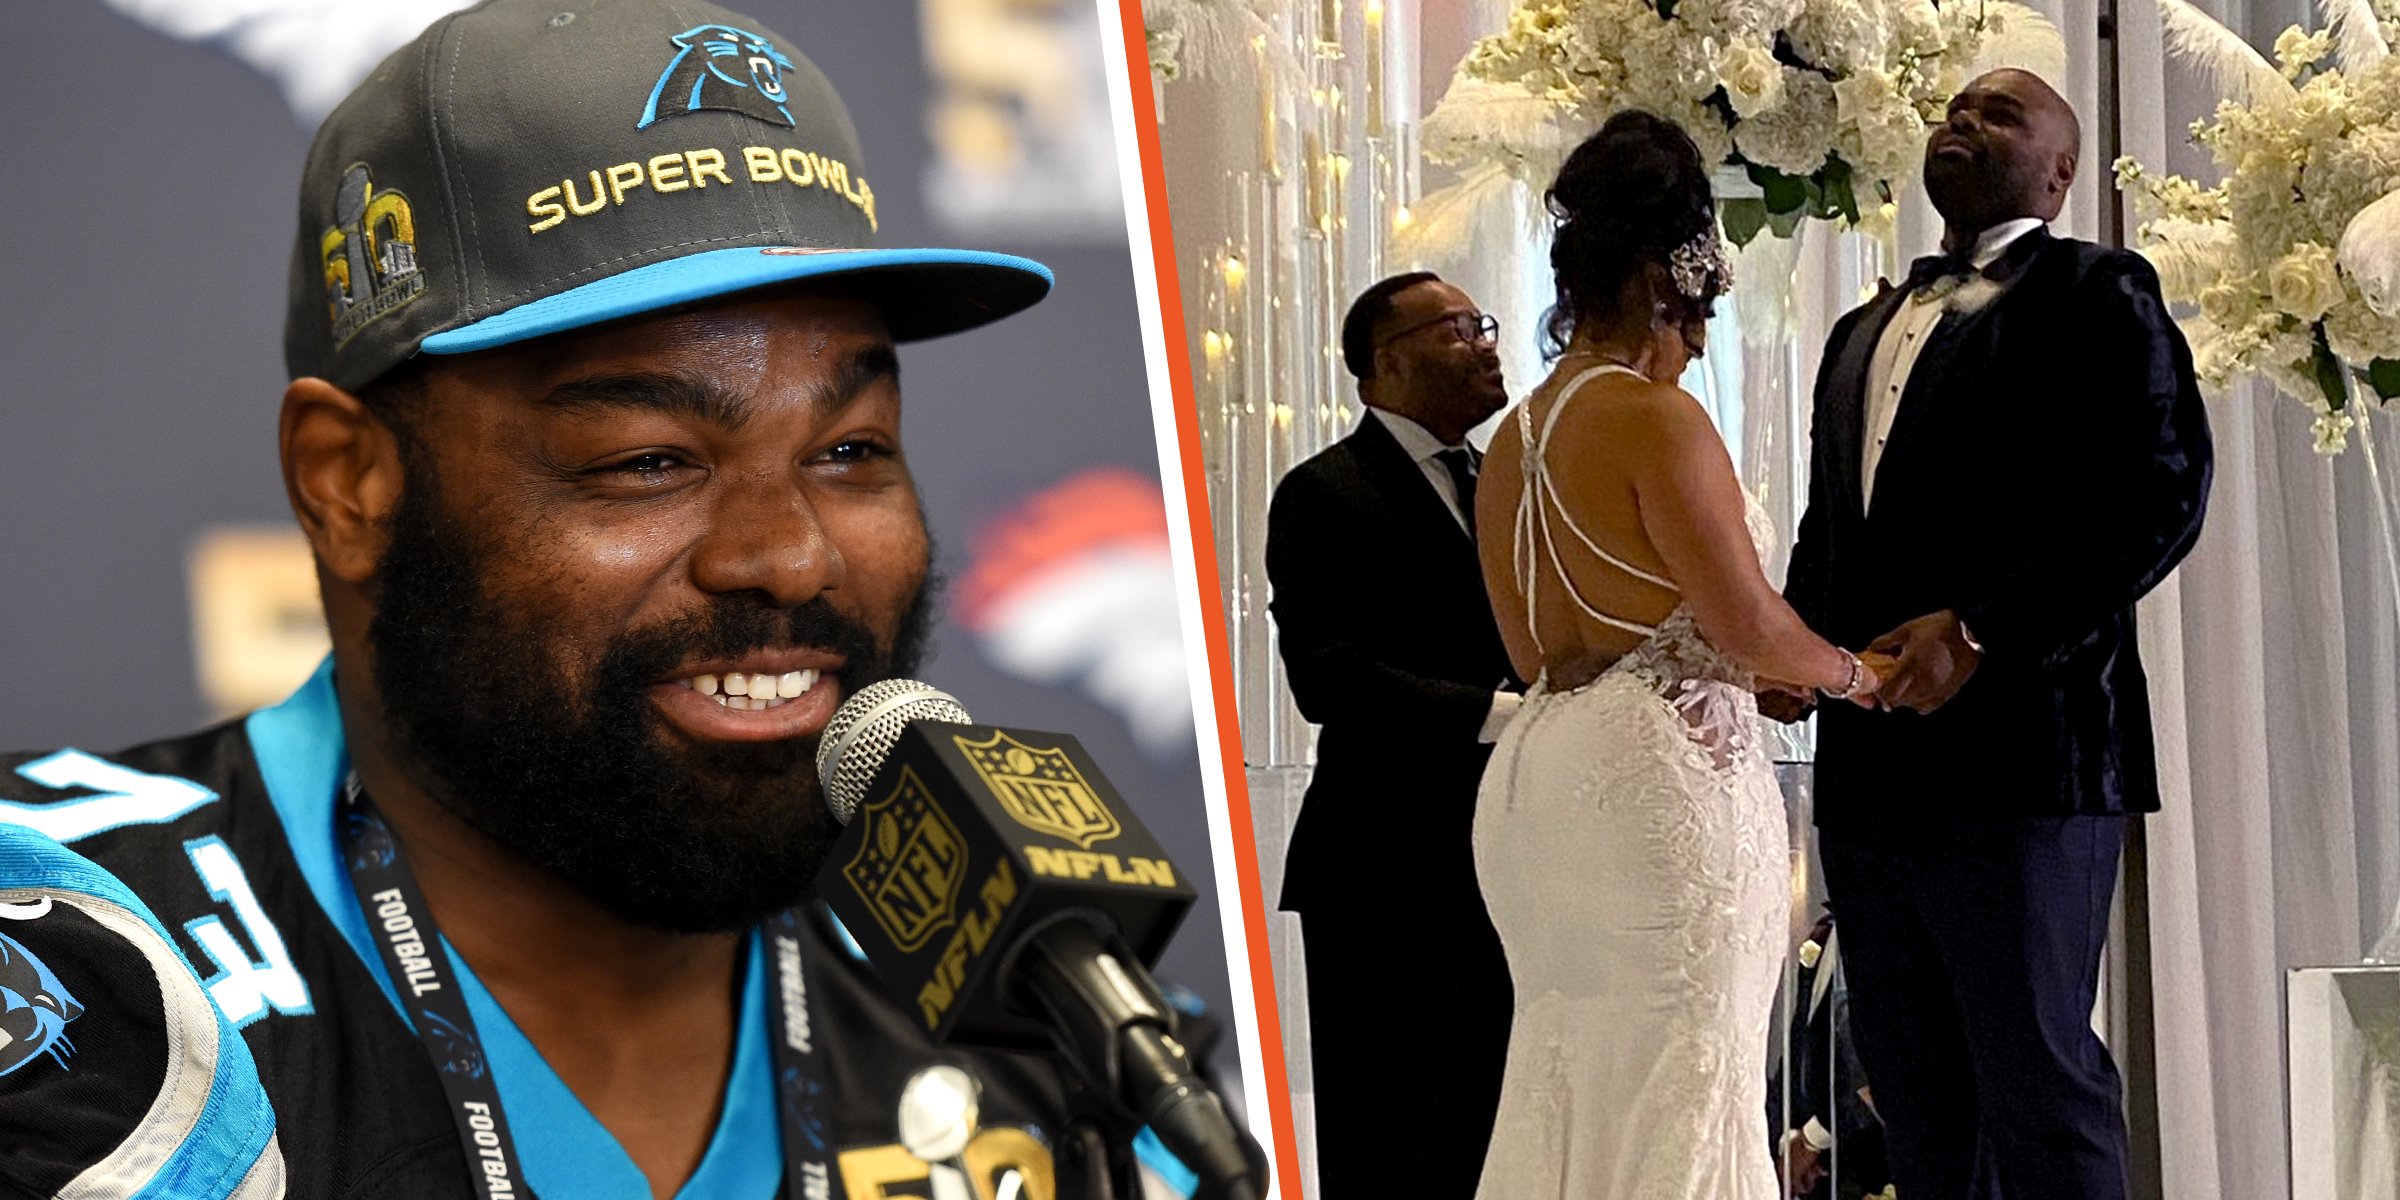 Michael Oher and wife Tiffany Roy Oher. | Source: Getty Images / Instagram.com/michaeloher